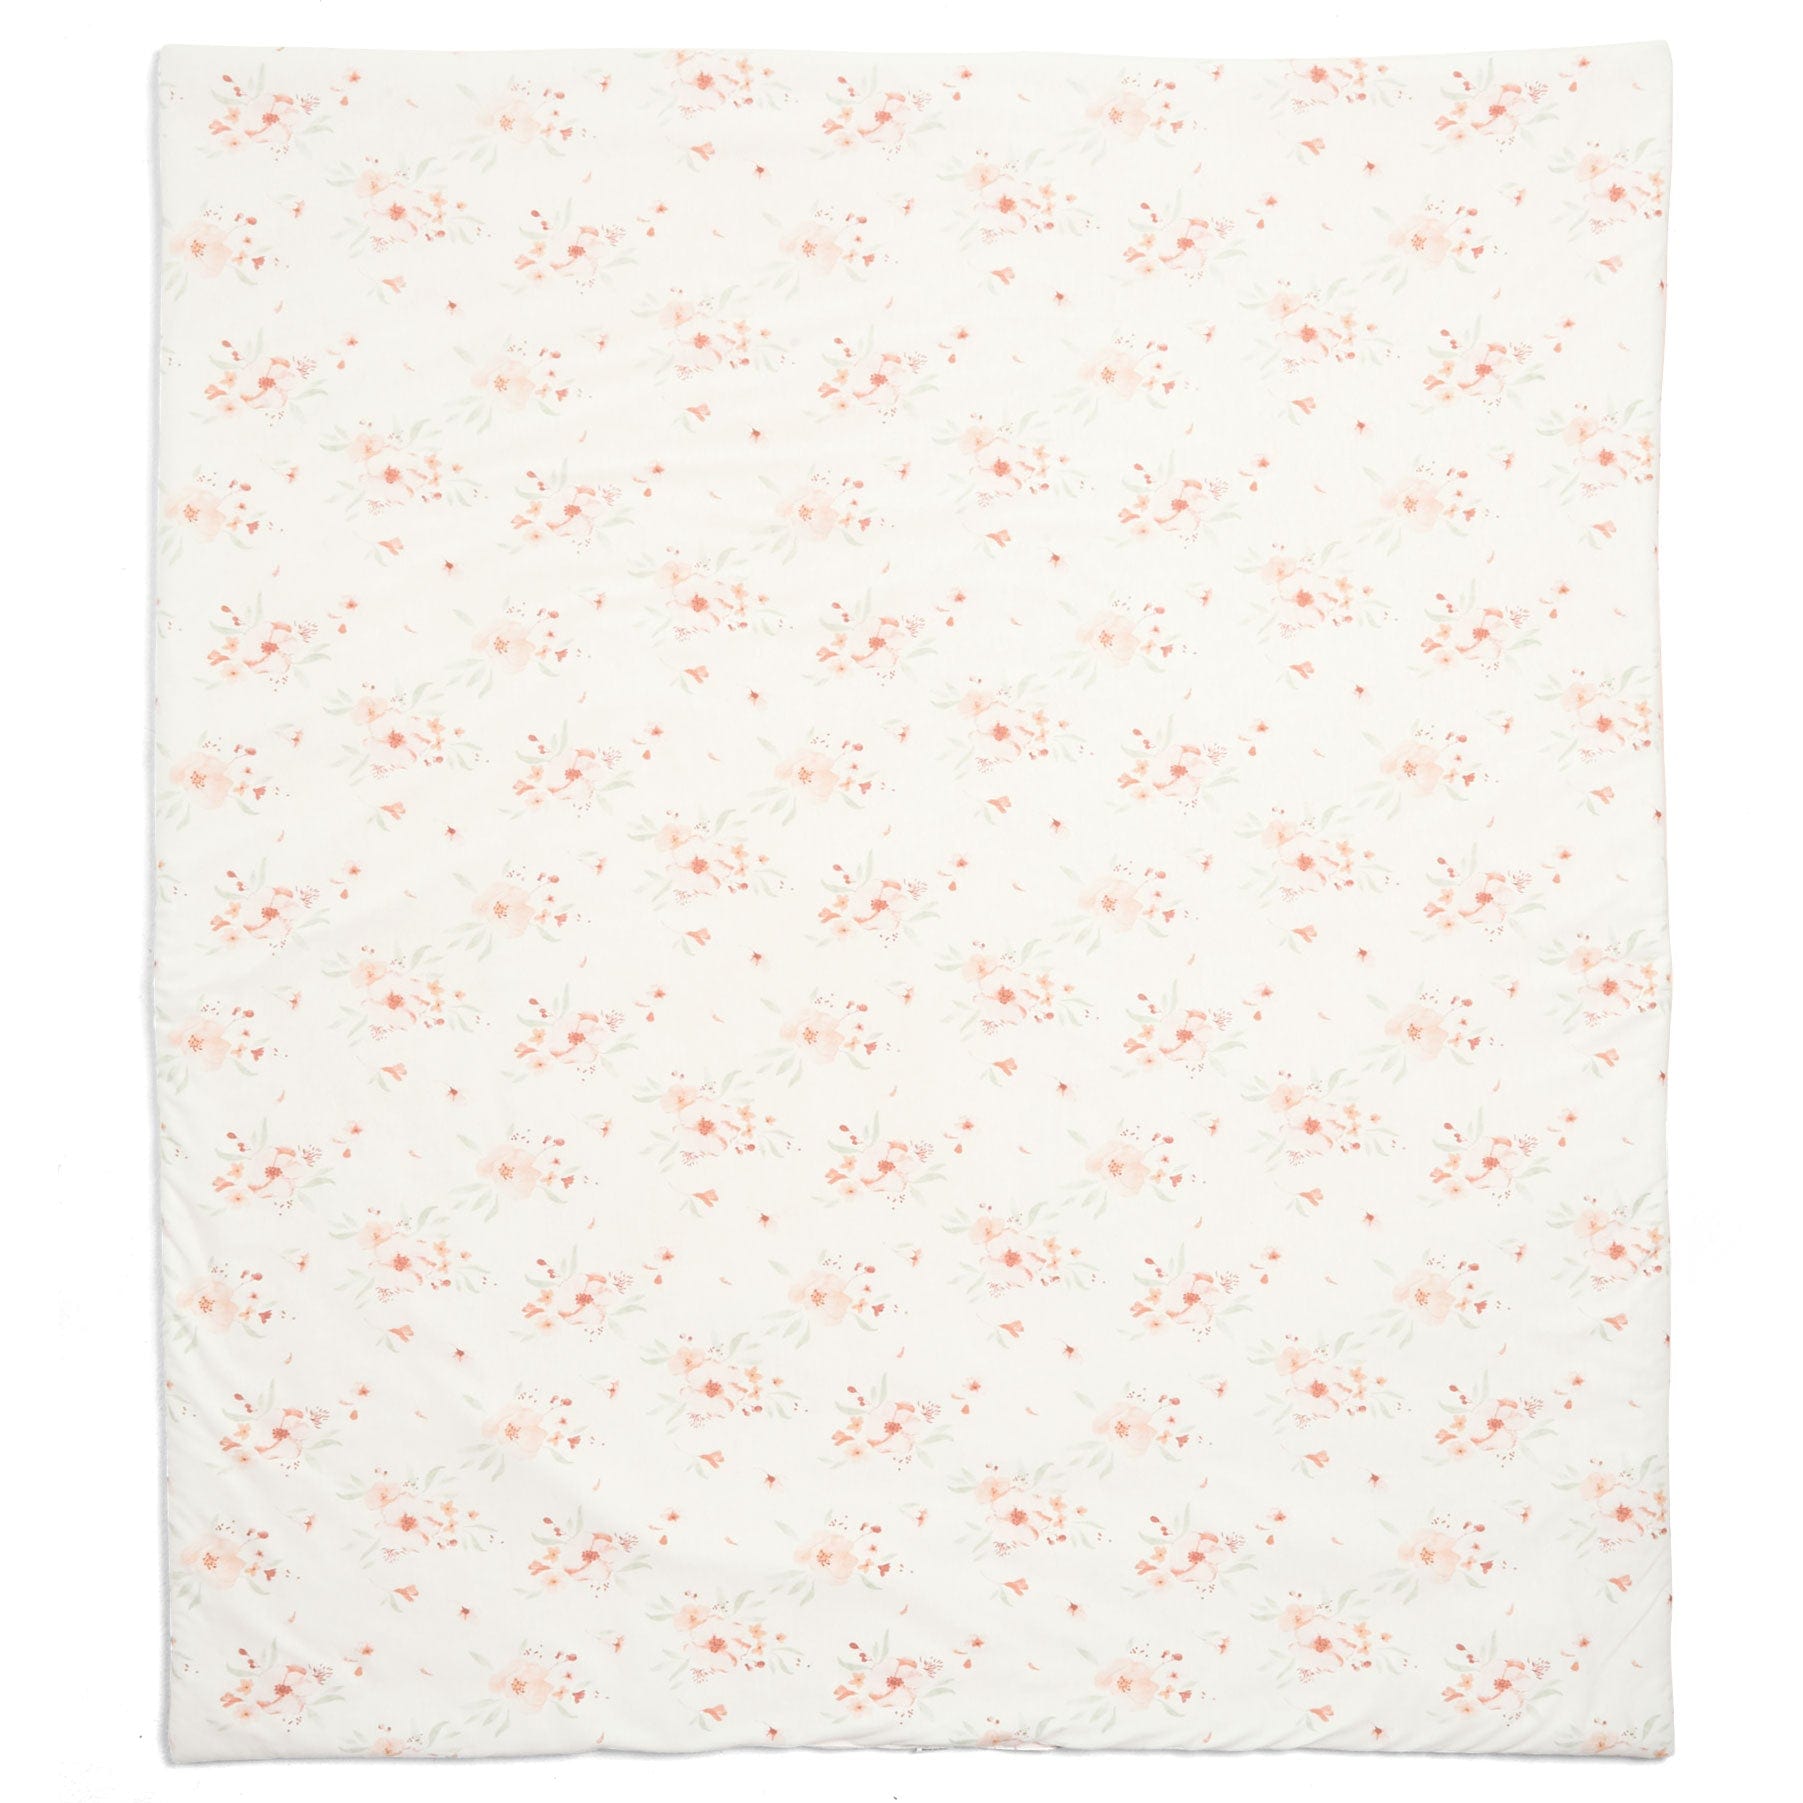 Mamas & Papas Cot & Cot Bed Quilts M&P Welcome to the World Cot Bed Quilt (Floral Spot) 7233X1600